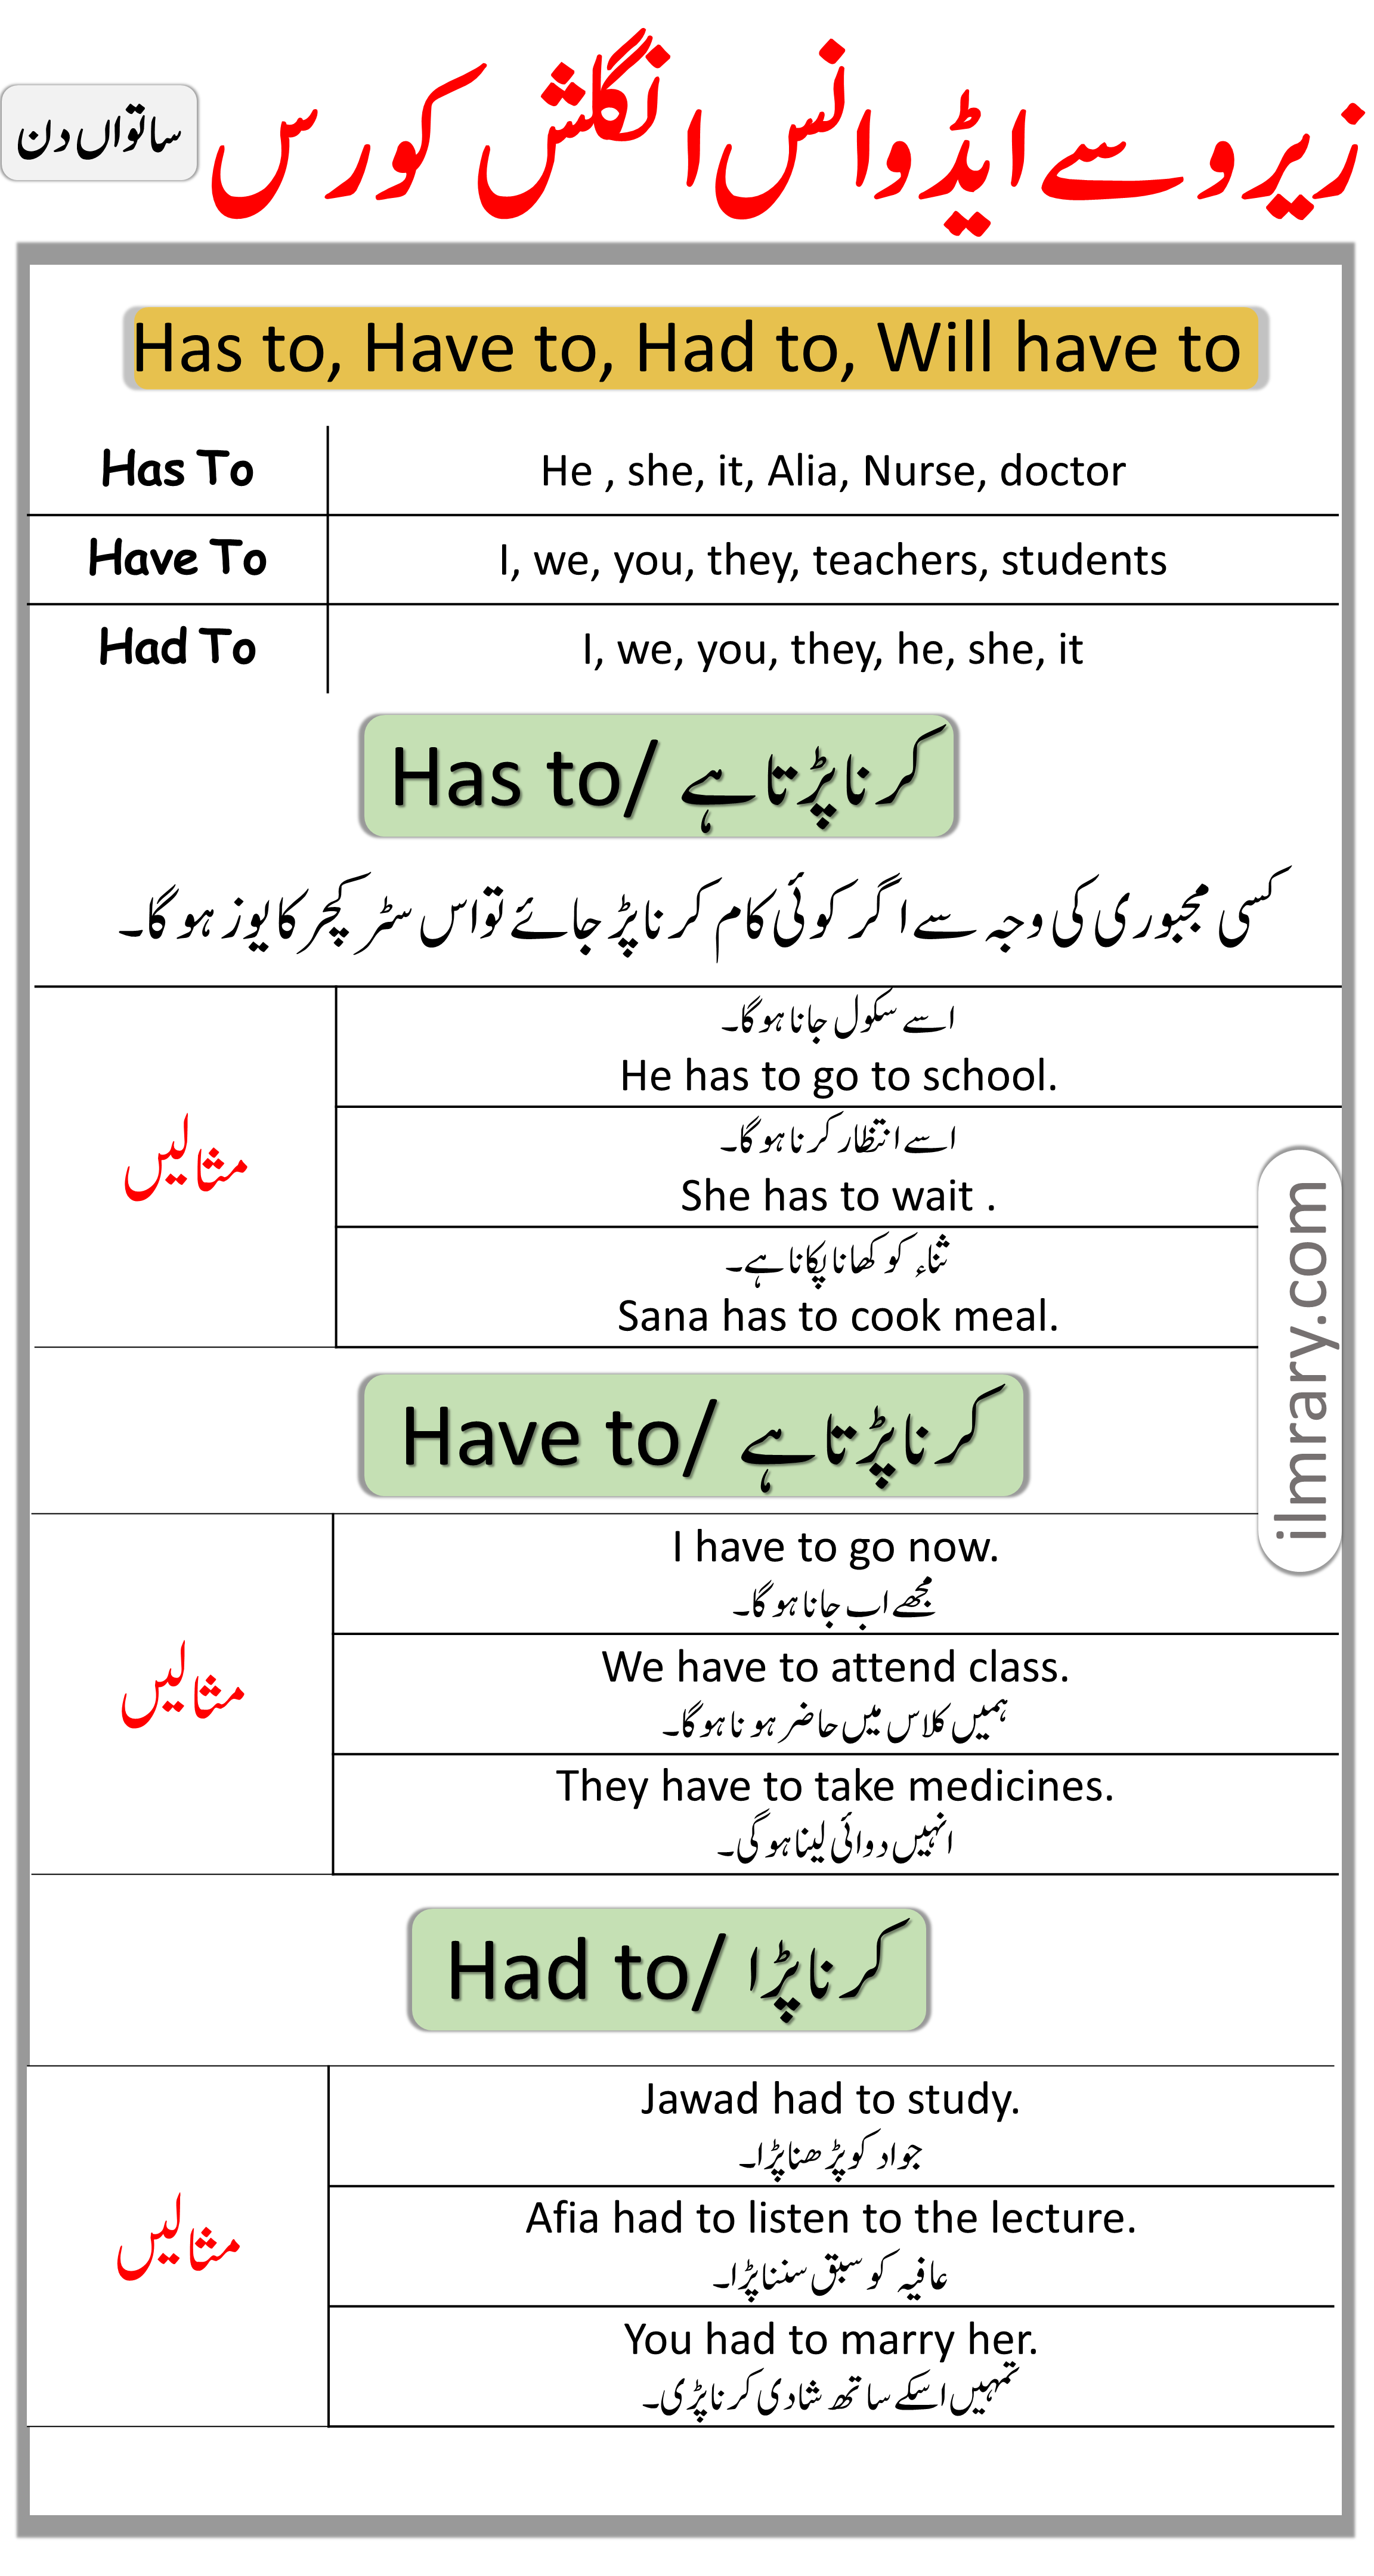 Use of Has to, Have to, Had to, in Urdu with Examples